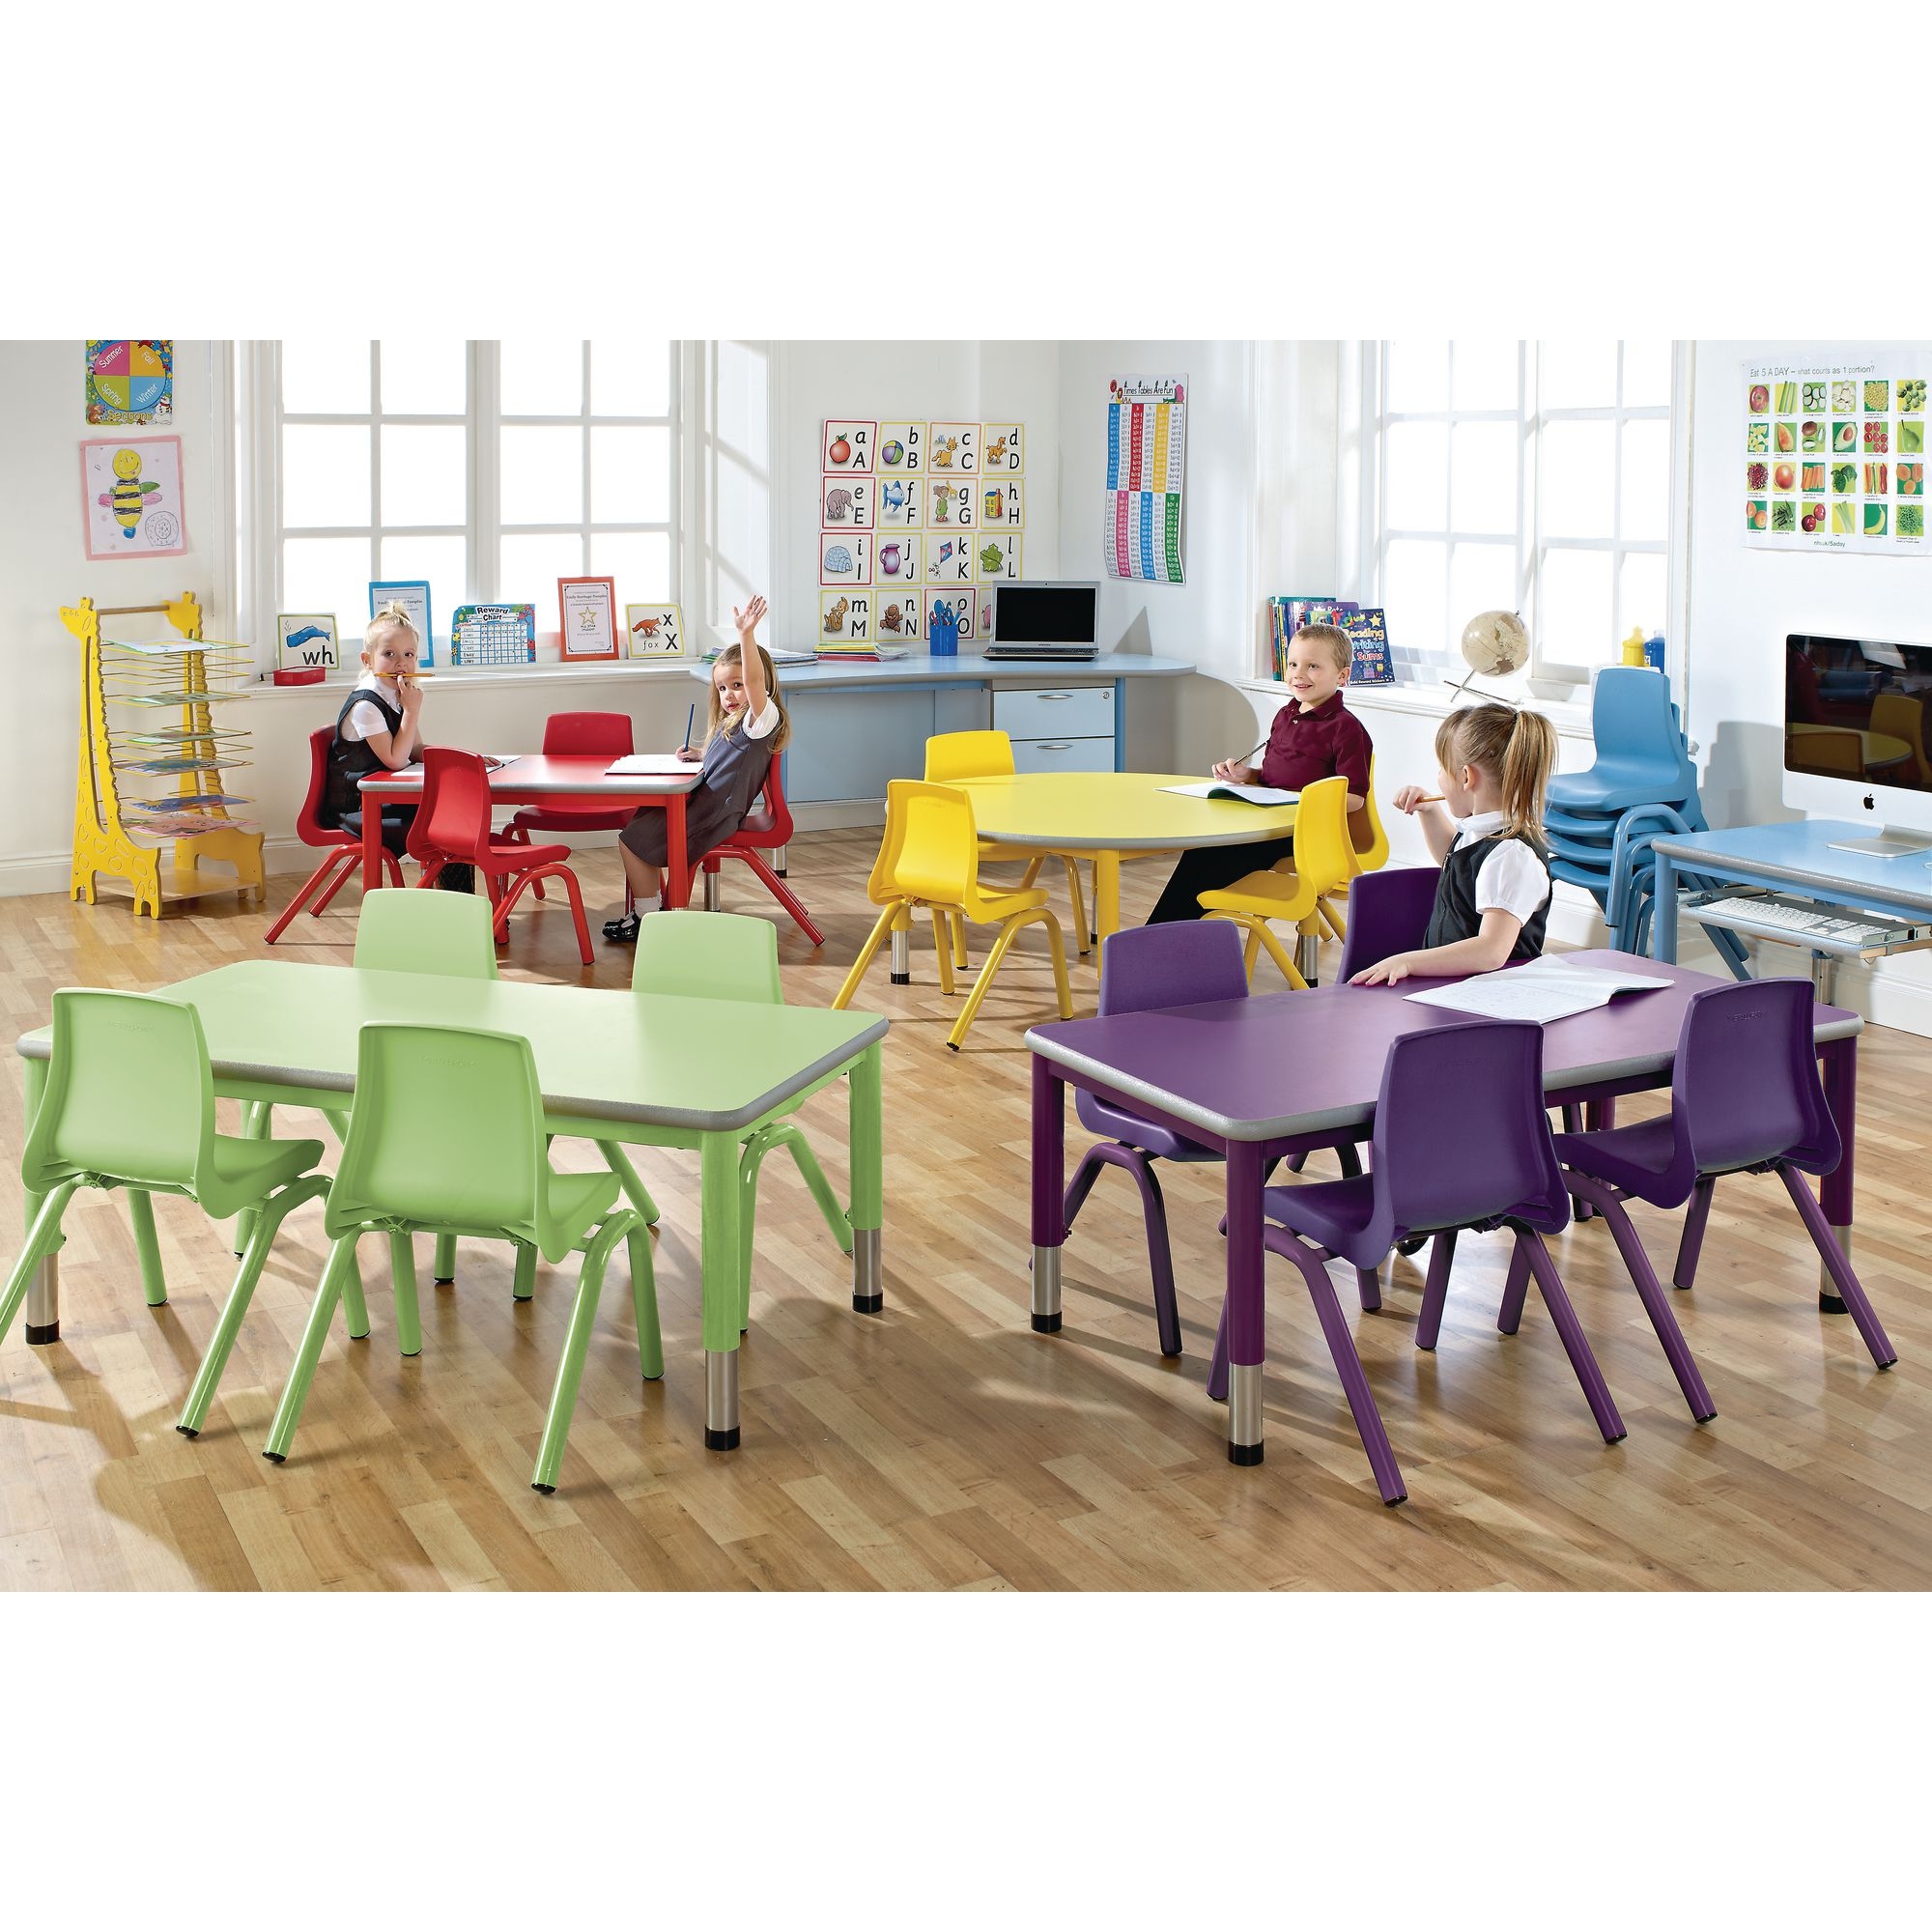 Harlequin Rectangular Height Adjustable Steel Classroom Pack: Table and 4 Chairs - 900 x 600 x 530mm - Purple